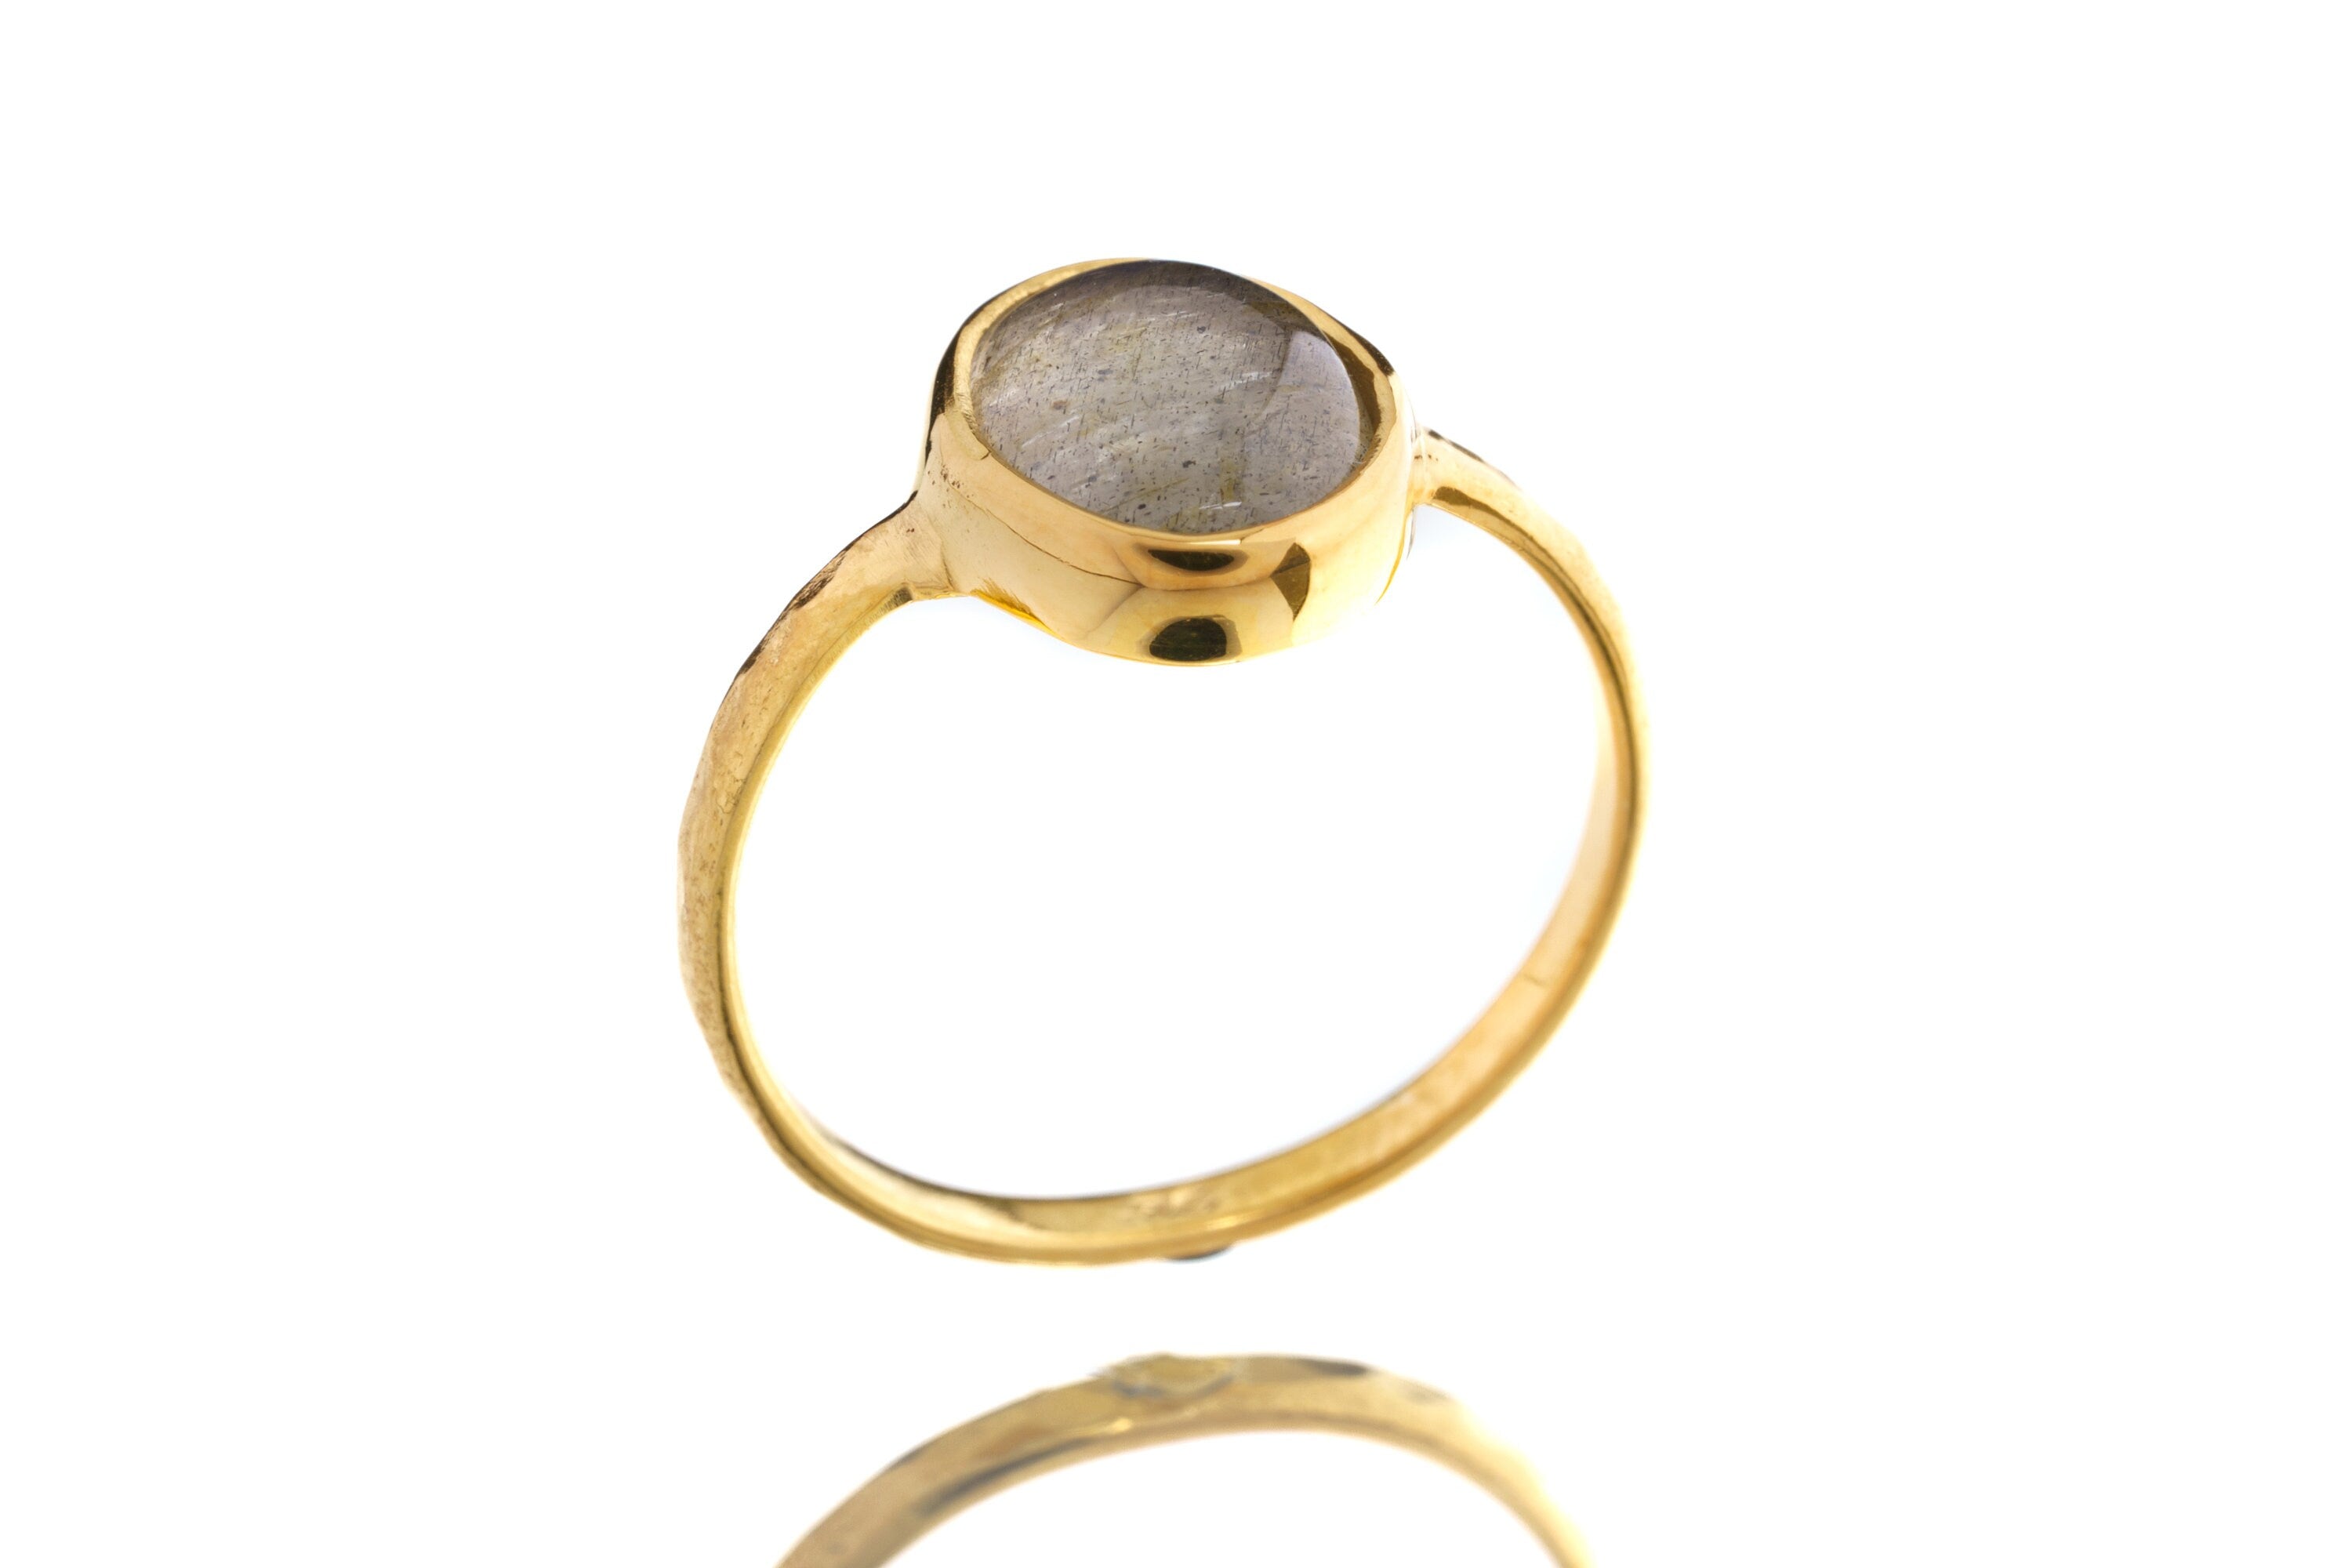 High Grade Labradorite - Stack Crystal Ring - Size 5 US - Gold Plated 925 Sterling Silver - Thin Band Hammer Textured